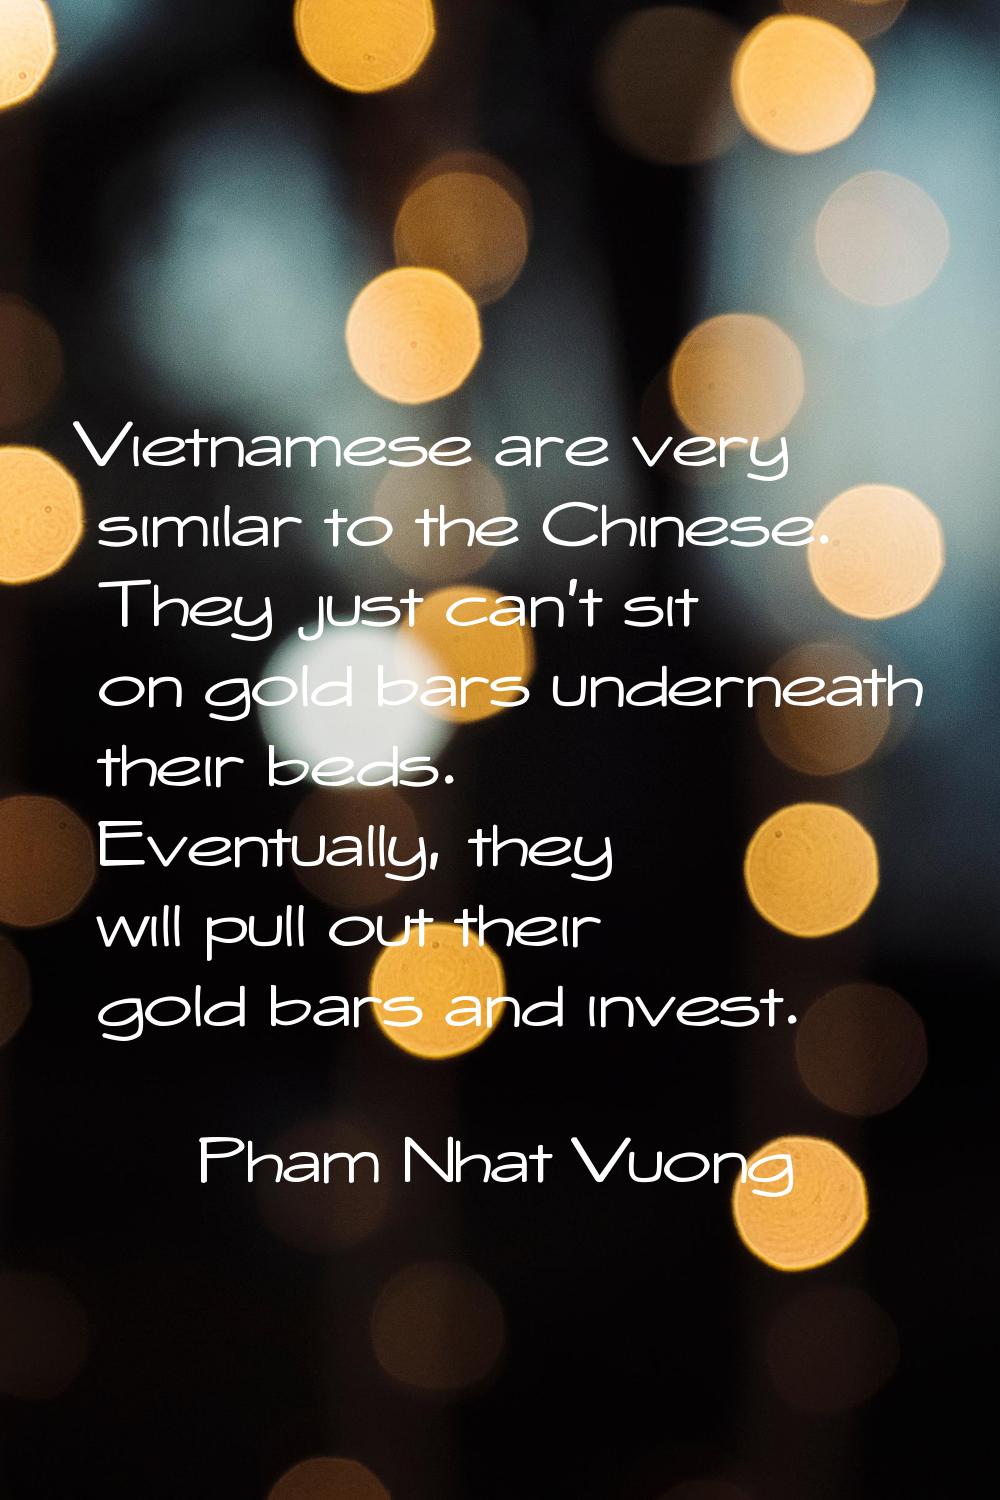 Vietnamese are very similar to the Chinese. They just can't sit on gold bars underneath their beds.